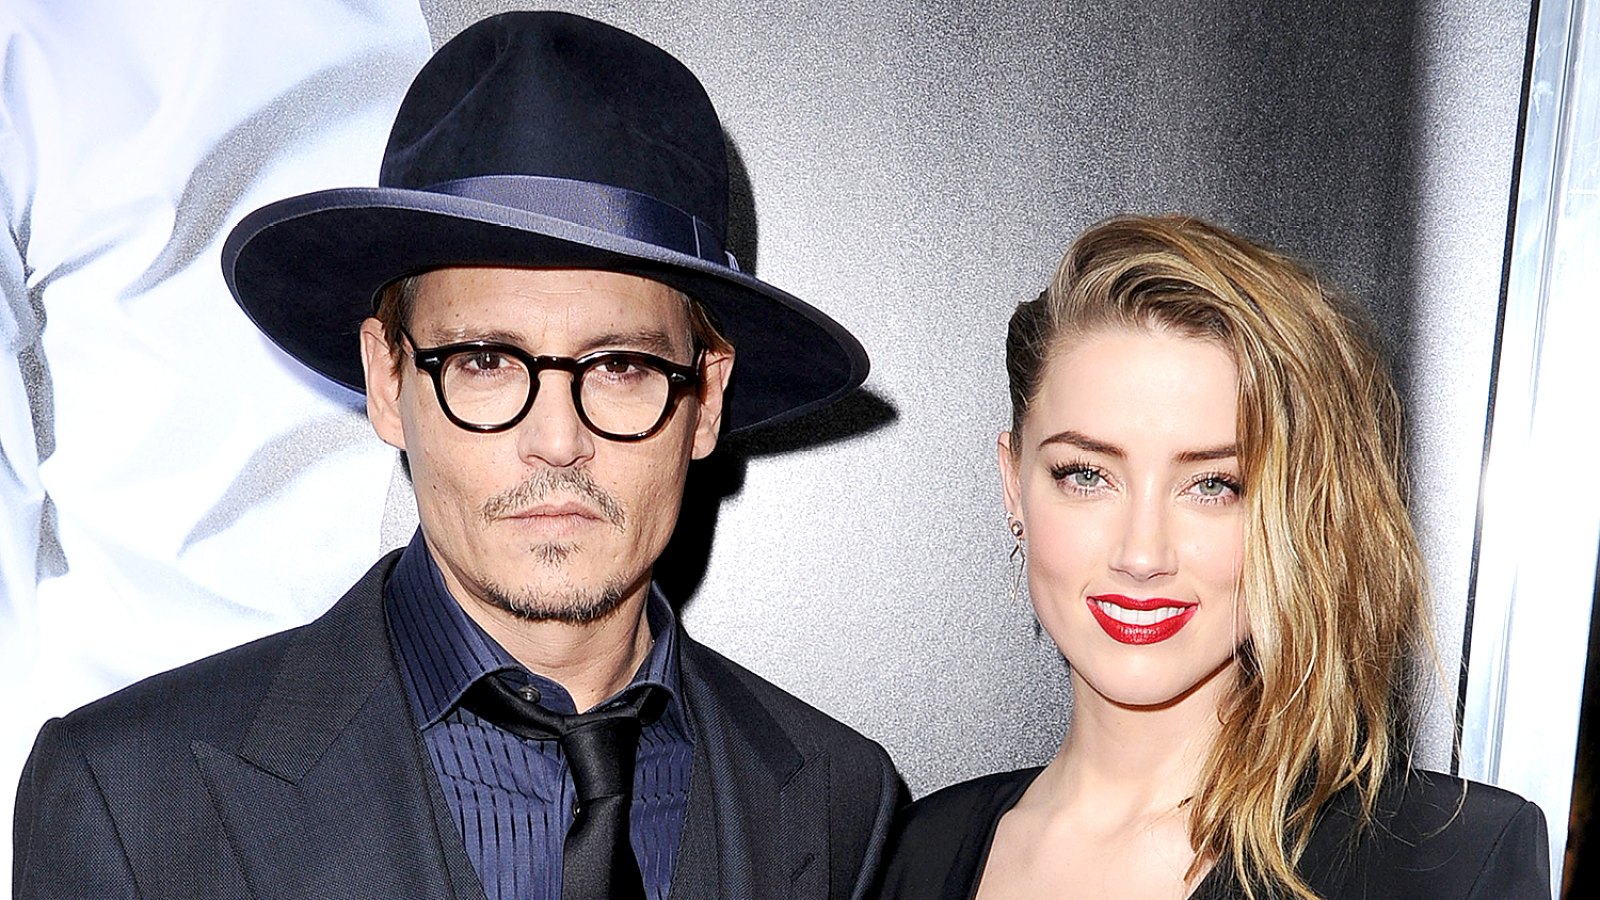 Johnny Depp and Amber Heard arrives at the "3 Days To Kill" at ArcLight Cinemas on February 12, 2014 in Hollywood, California.